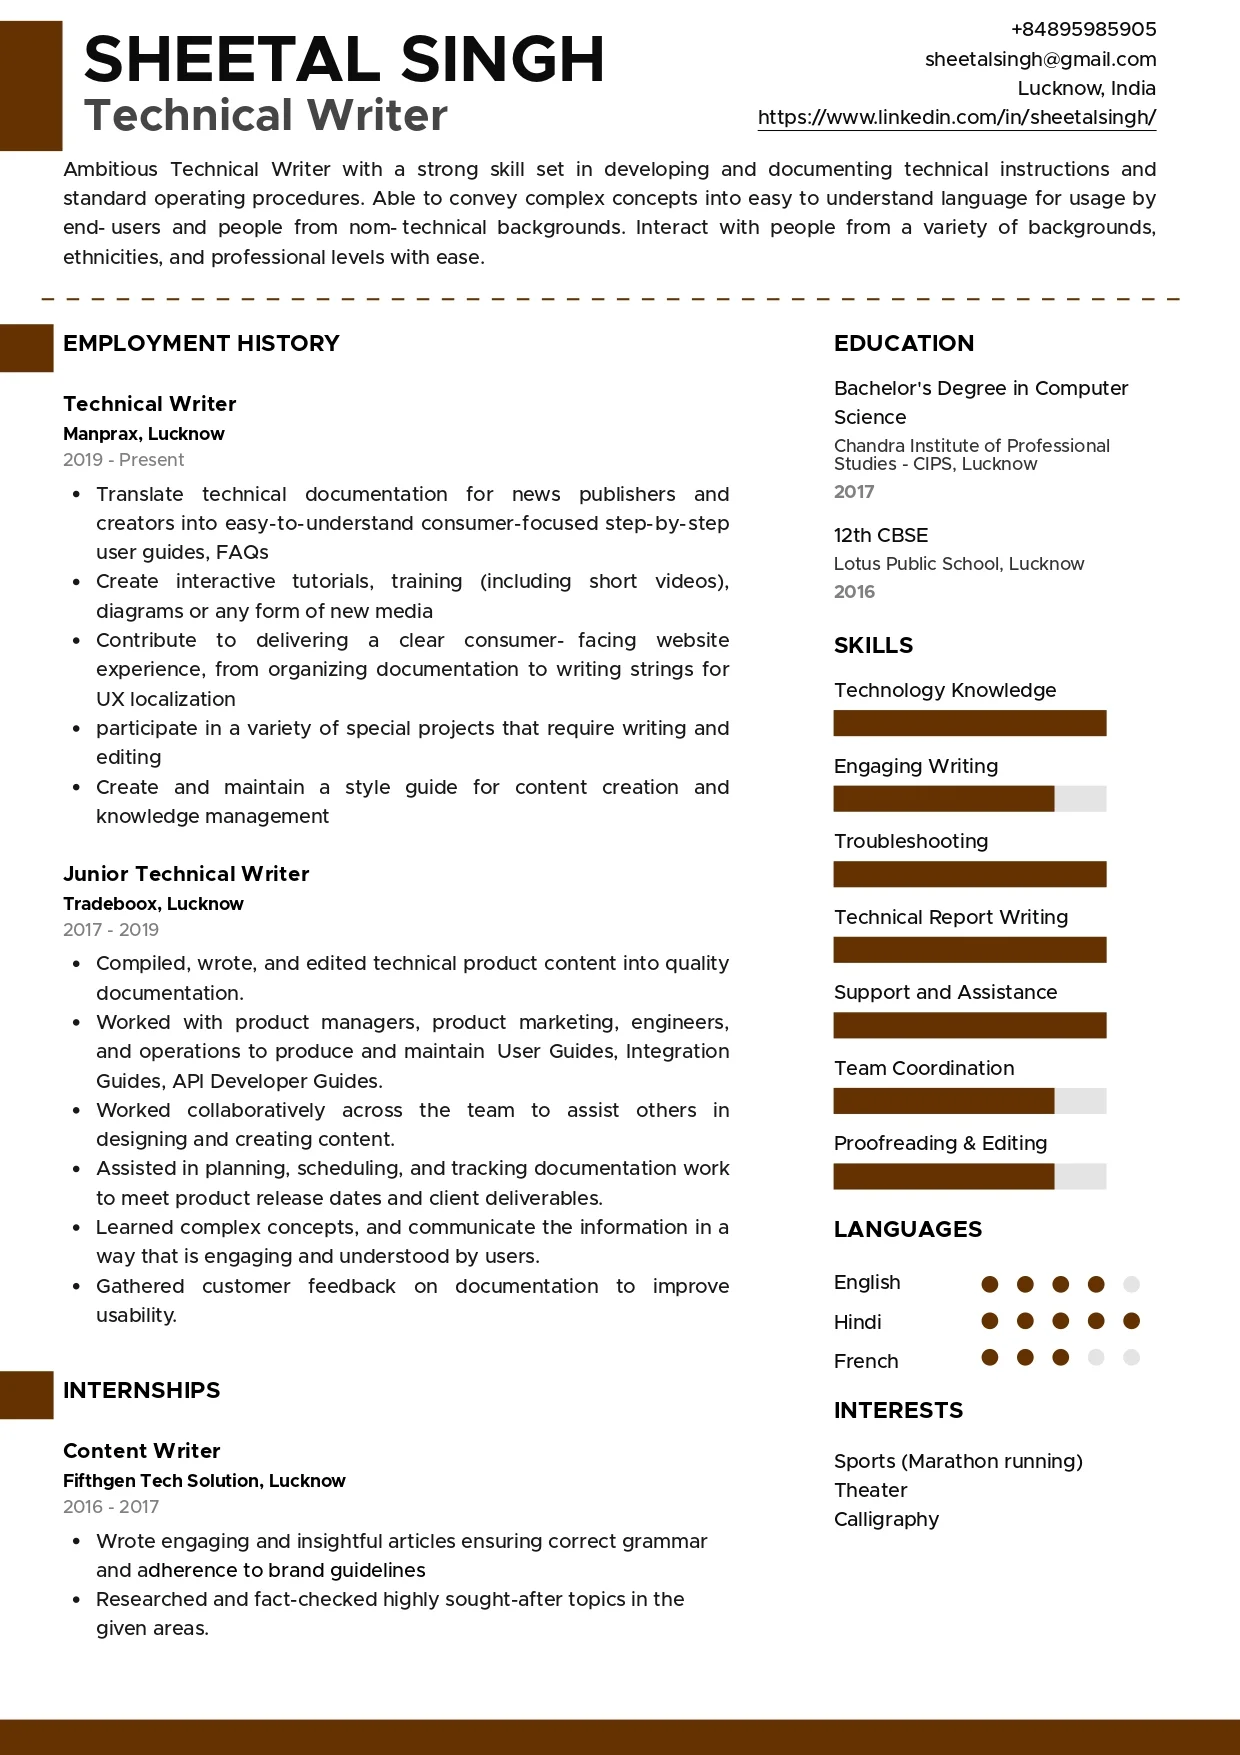 Sample Resume of Technical Writer | Free Resume Templates & Samples on Resumod.co